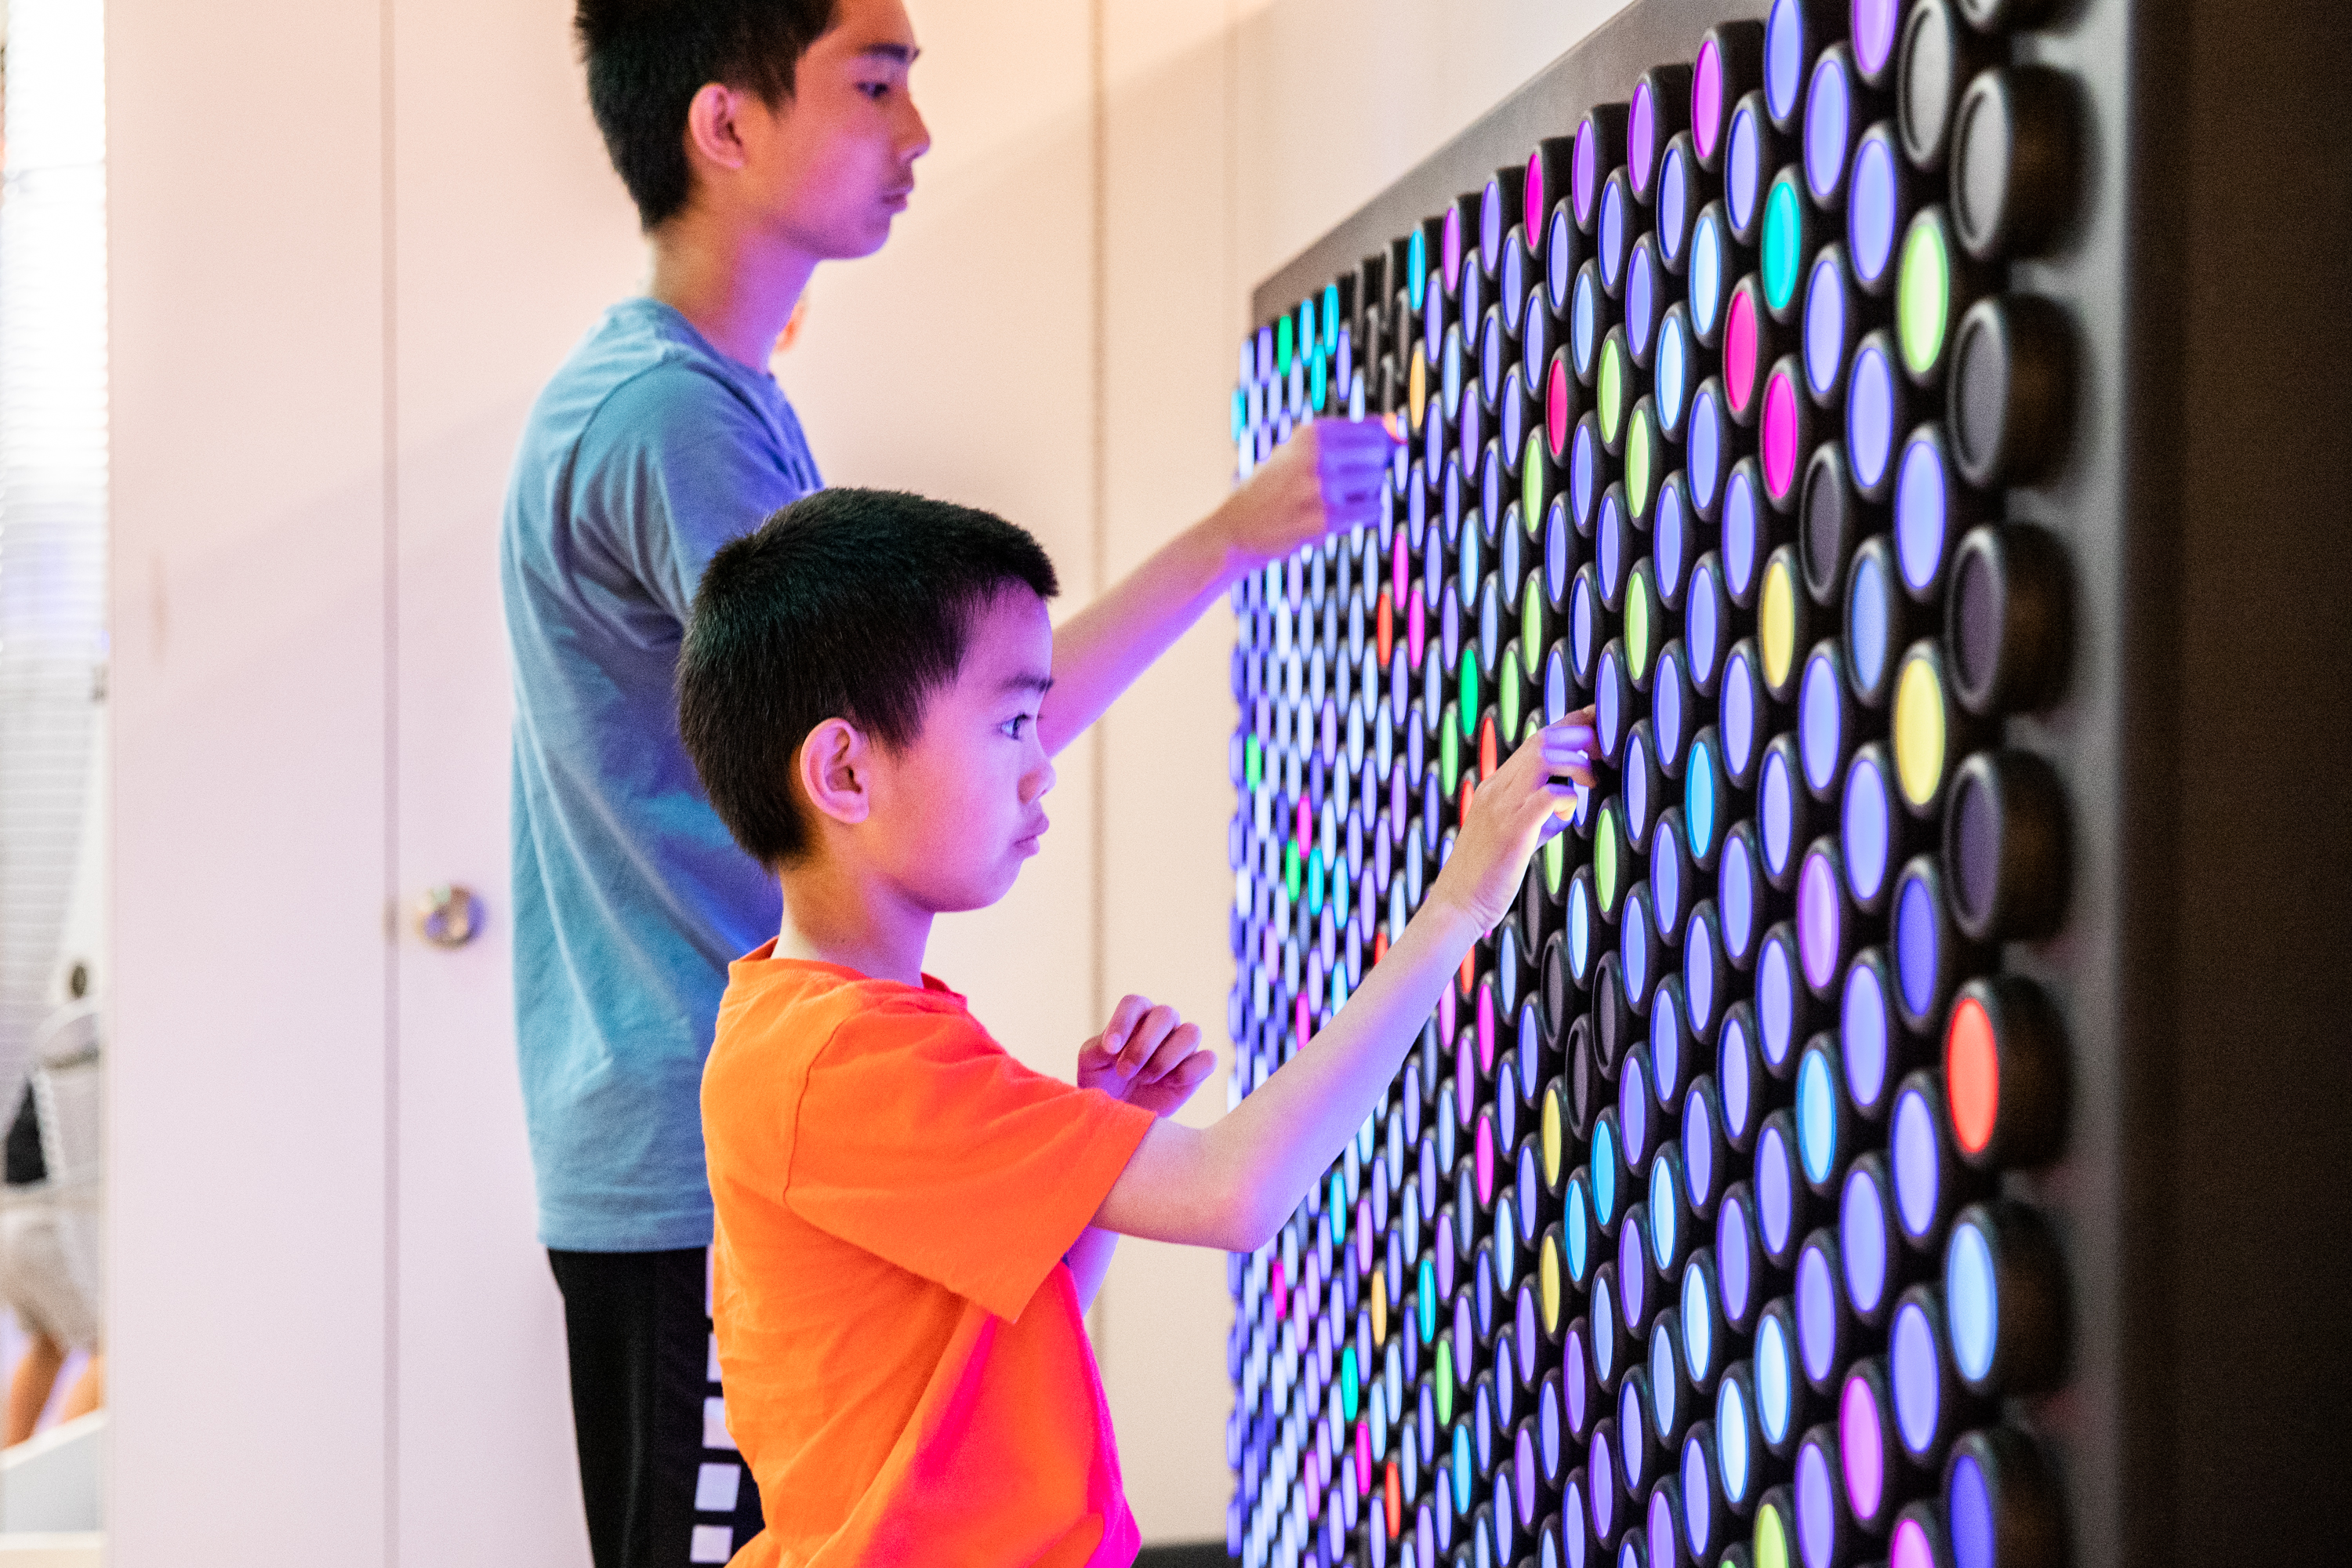 Two young boys at Everbrite in the Data Science Alley exhibit